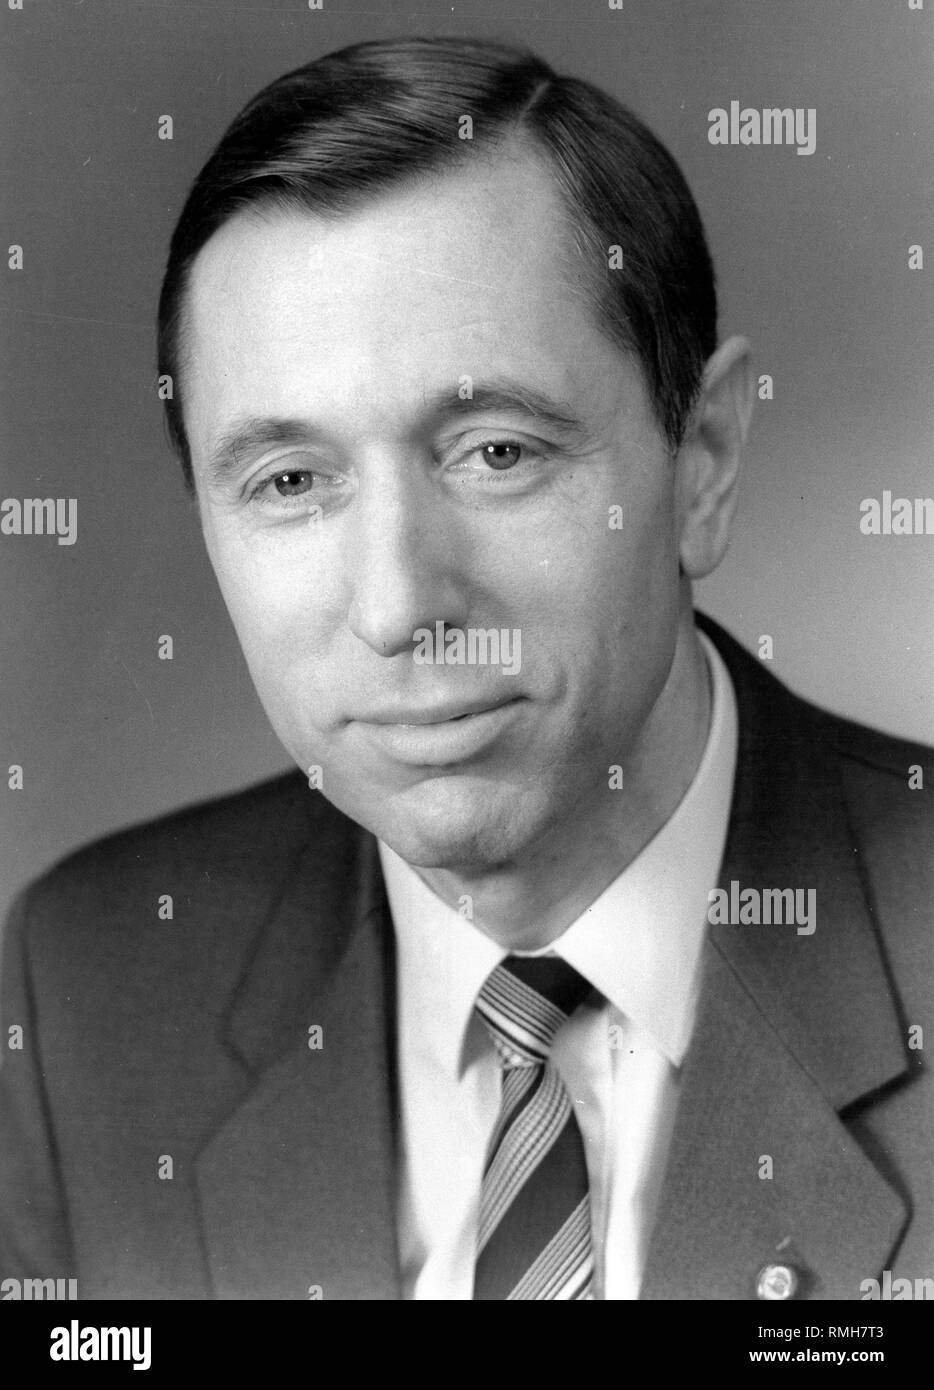 Felix Meier - (* 20.08.1936) between 1982 - 1989 GDR-Minister of Electrical Engineering, between 1979 - 1984 Member of the SED district administration Berlin, between 1981 - 1990 Member of the People's Chamber of the GDR. Stock Photo